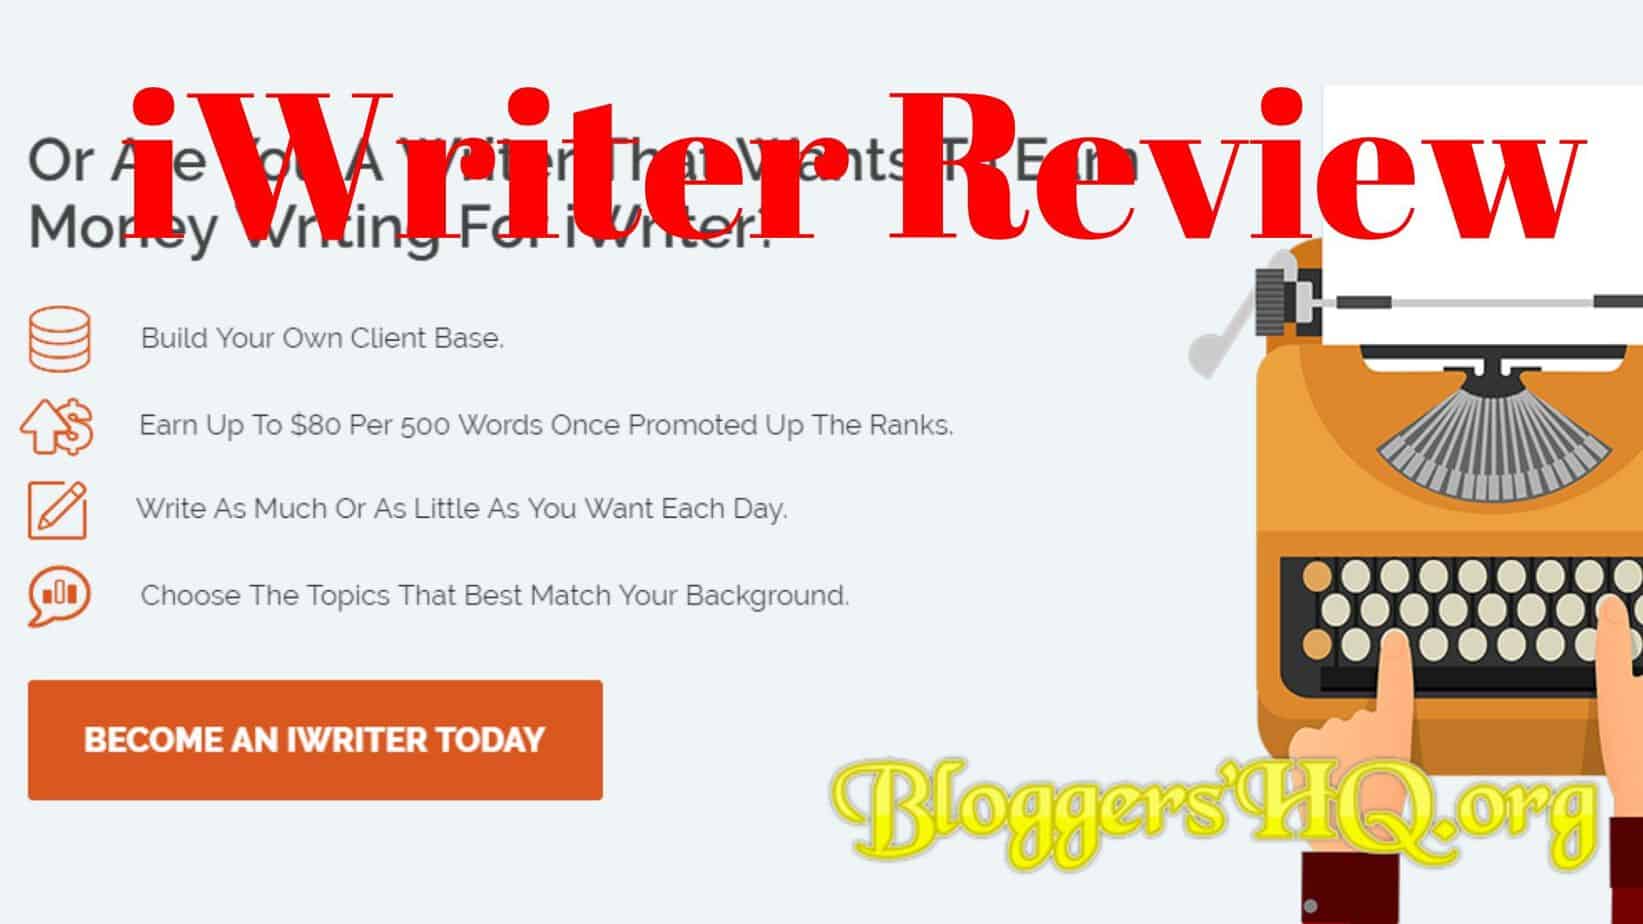 iWriter Review